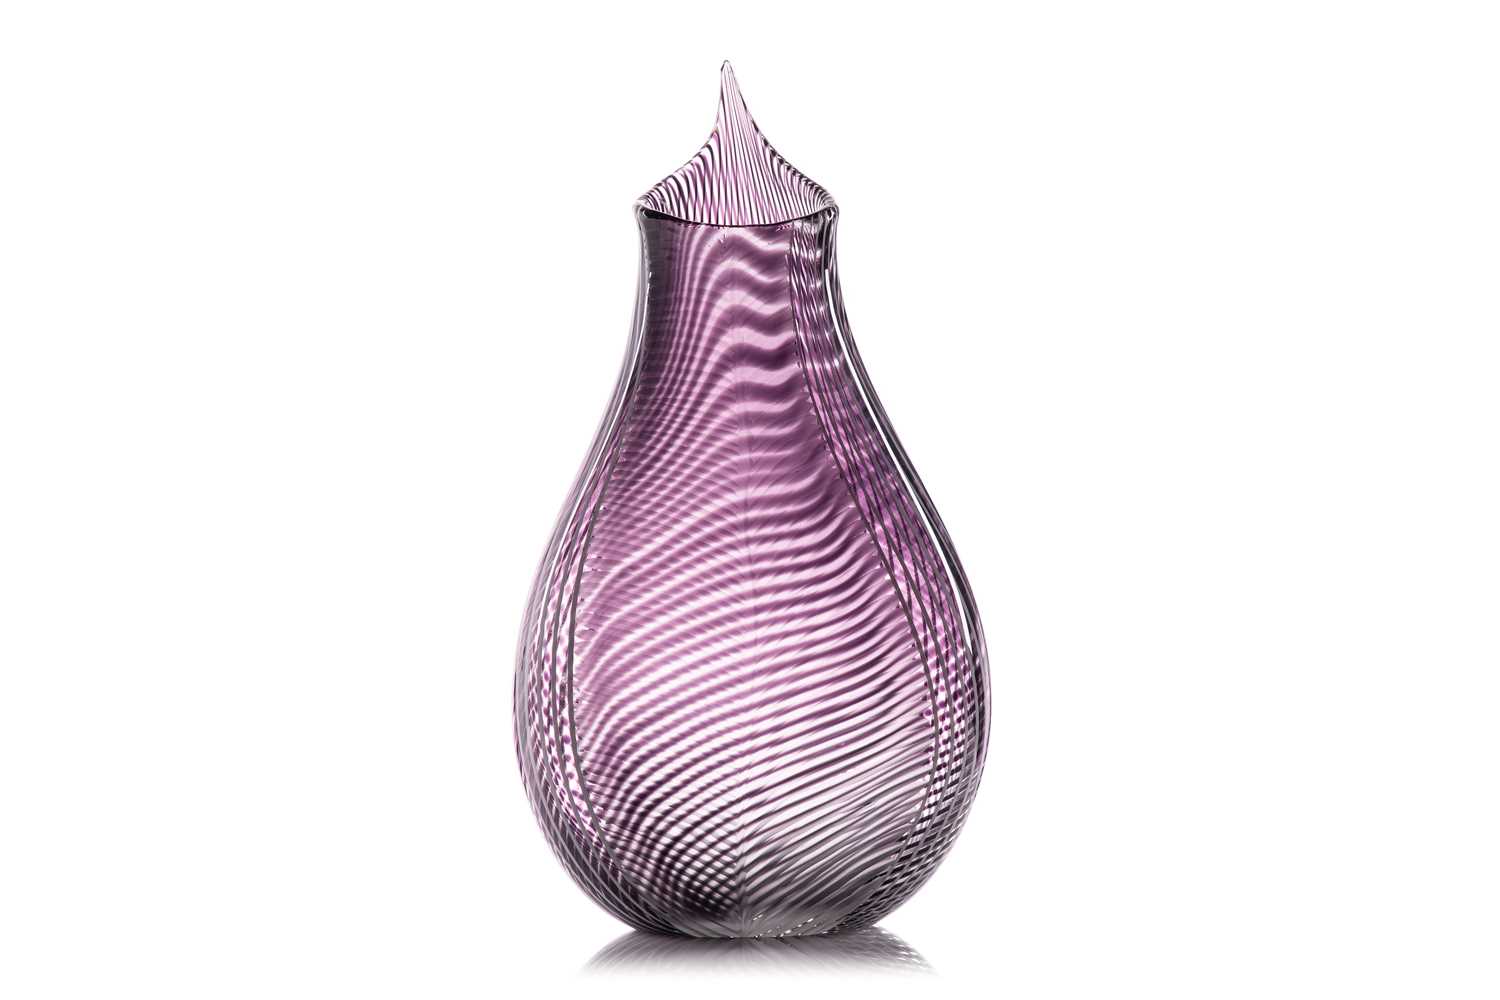 A Luca Vidal Murano large art glass vase with textured finish to one side, bespoke made for the